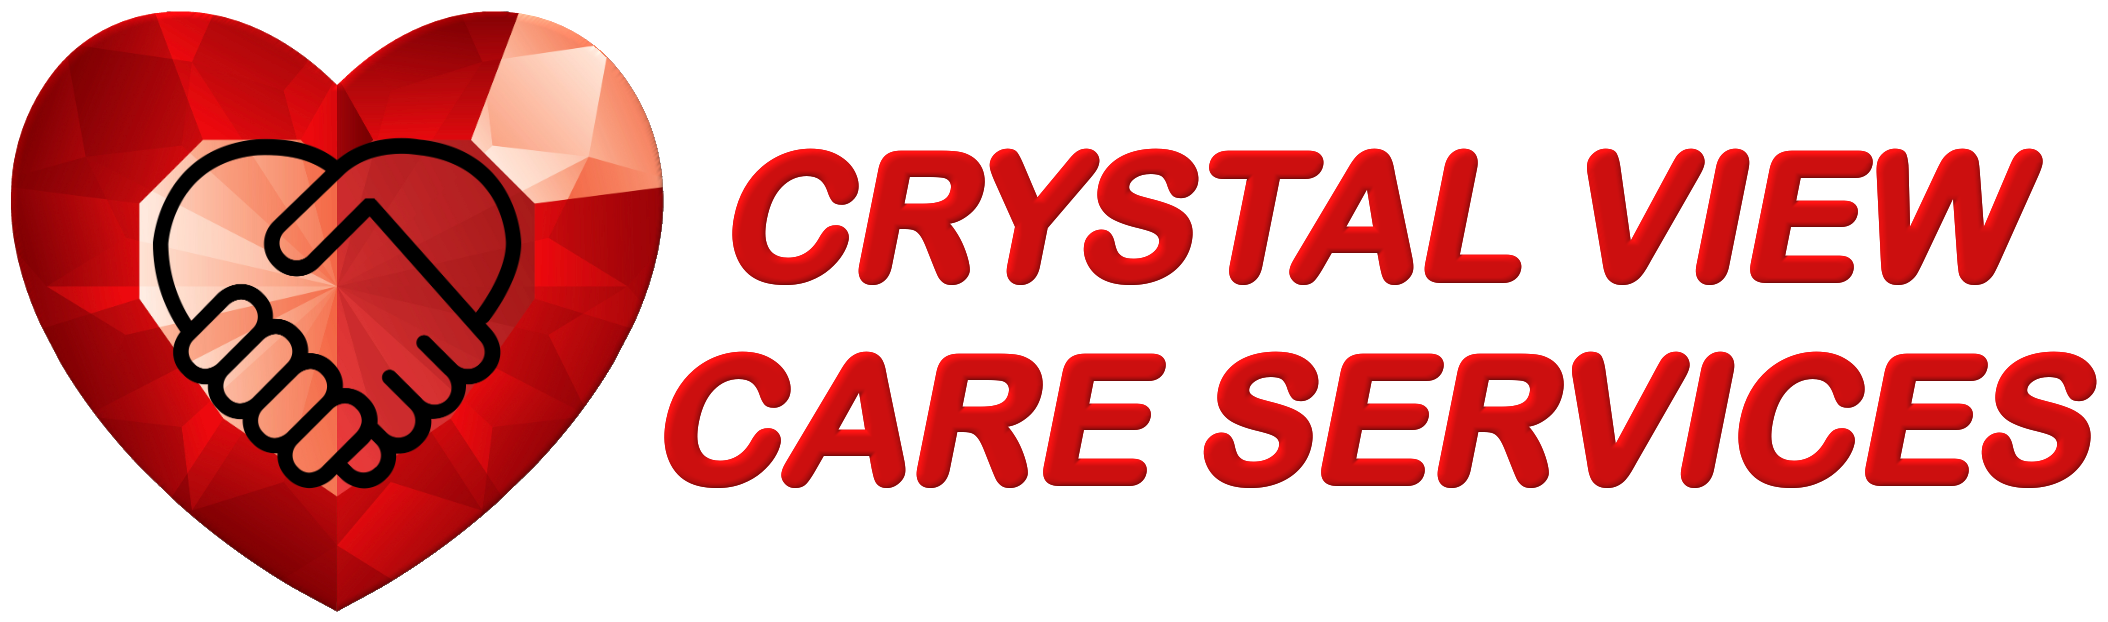 Crystal View Care Services